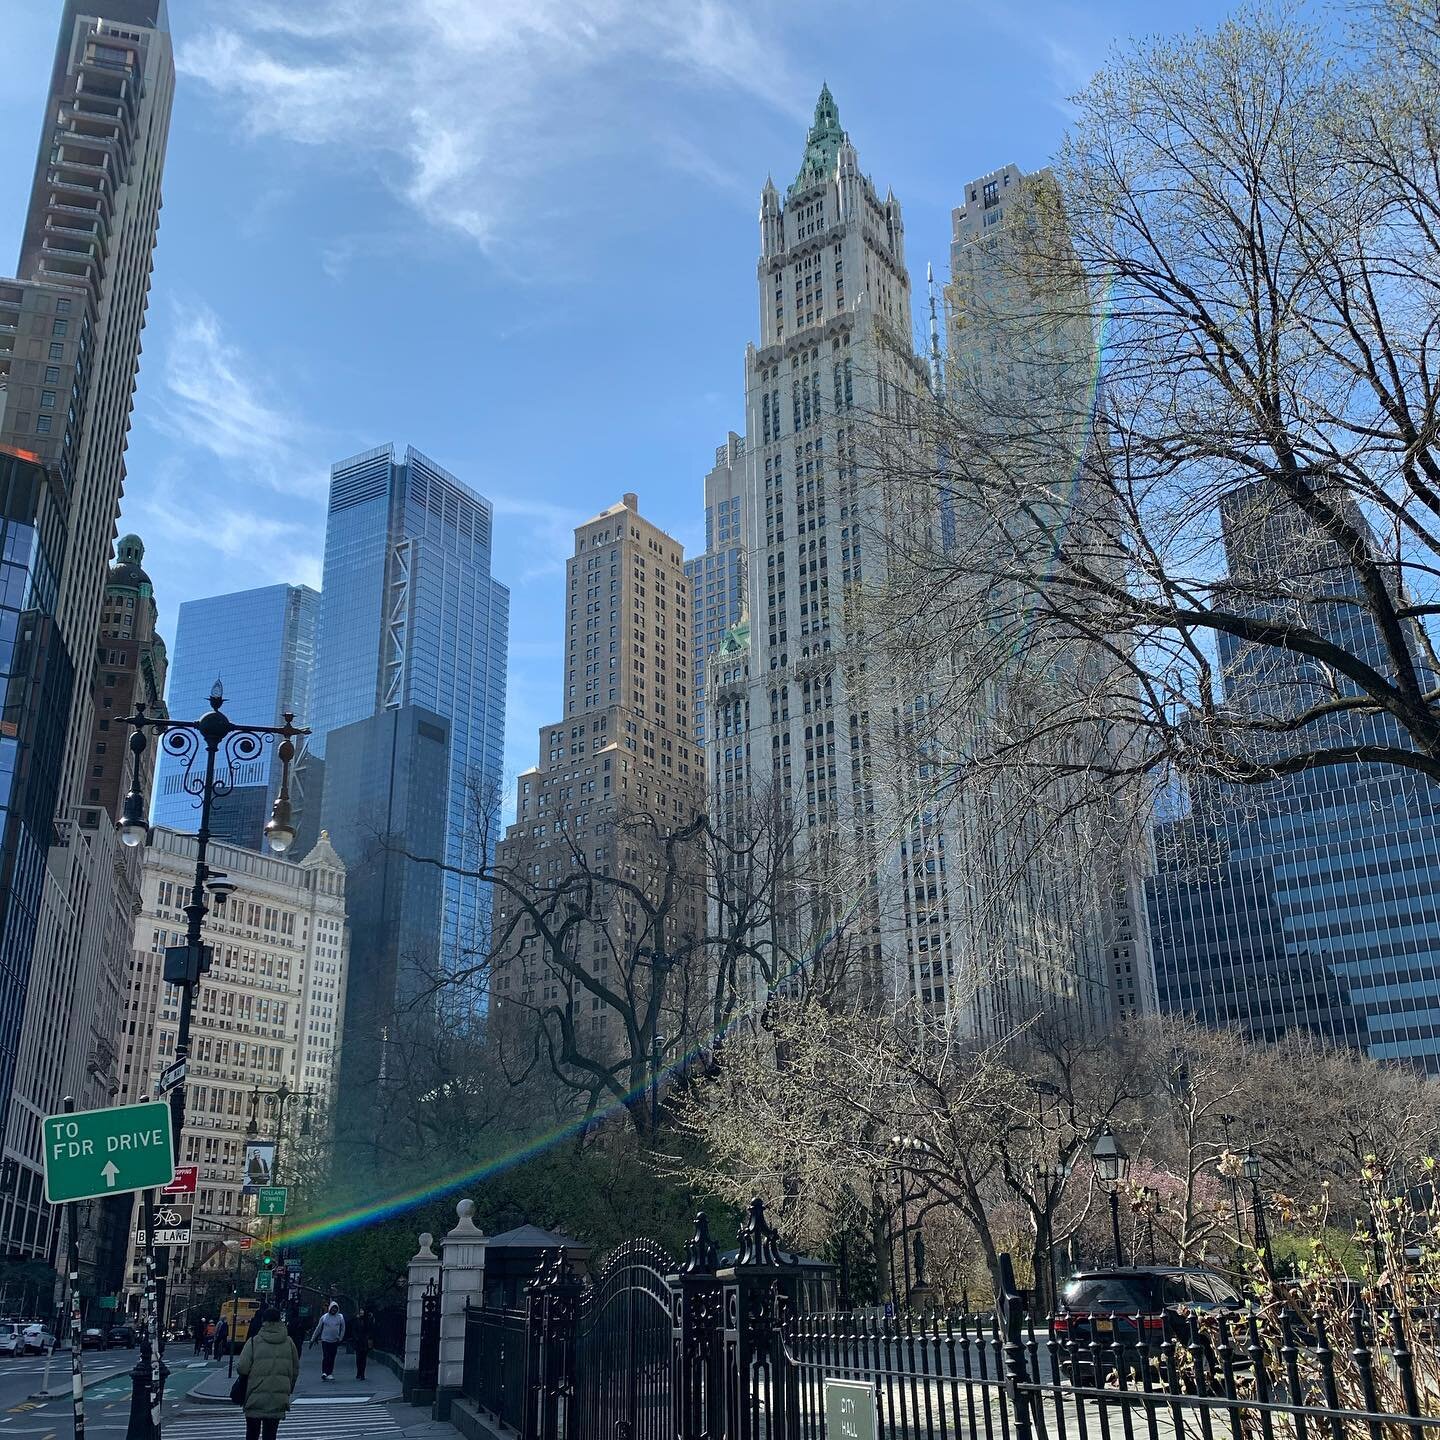 📸

#newyorkcity #ny #downtown #streets i used to love this walk all the time. the building with the green roof #woolworth is where I loved teaching our #nyu #sps classes. ☺️ The remote has been great, too, which has been a wonderful opportunity for 